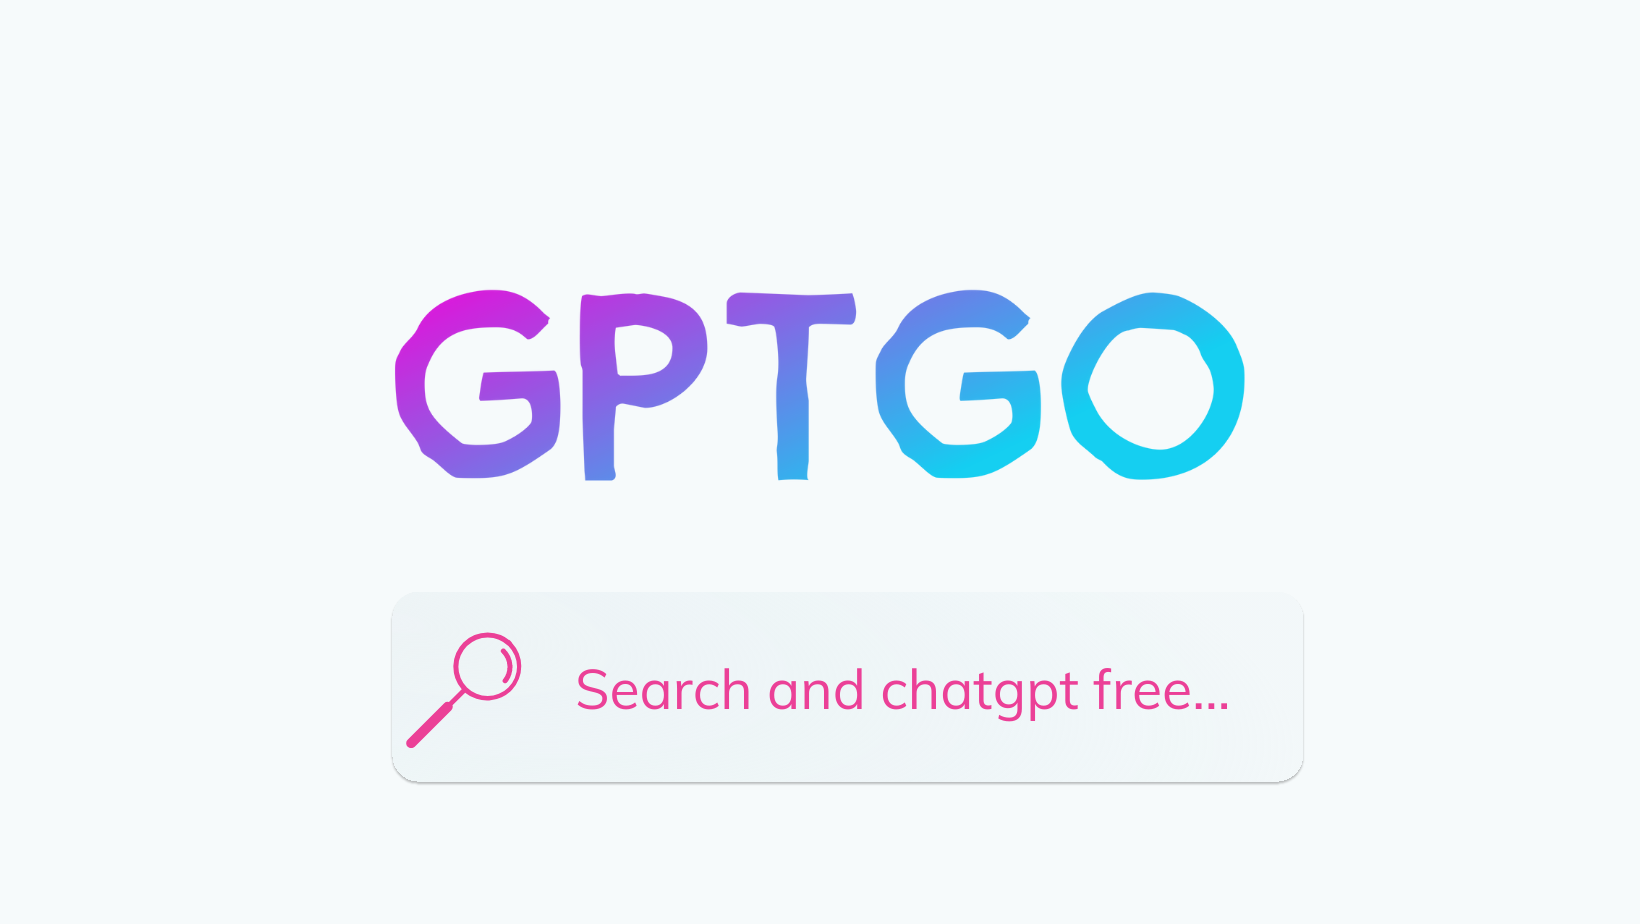 GPTGO - A free search engine integrated with google search results and chatgpt